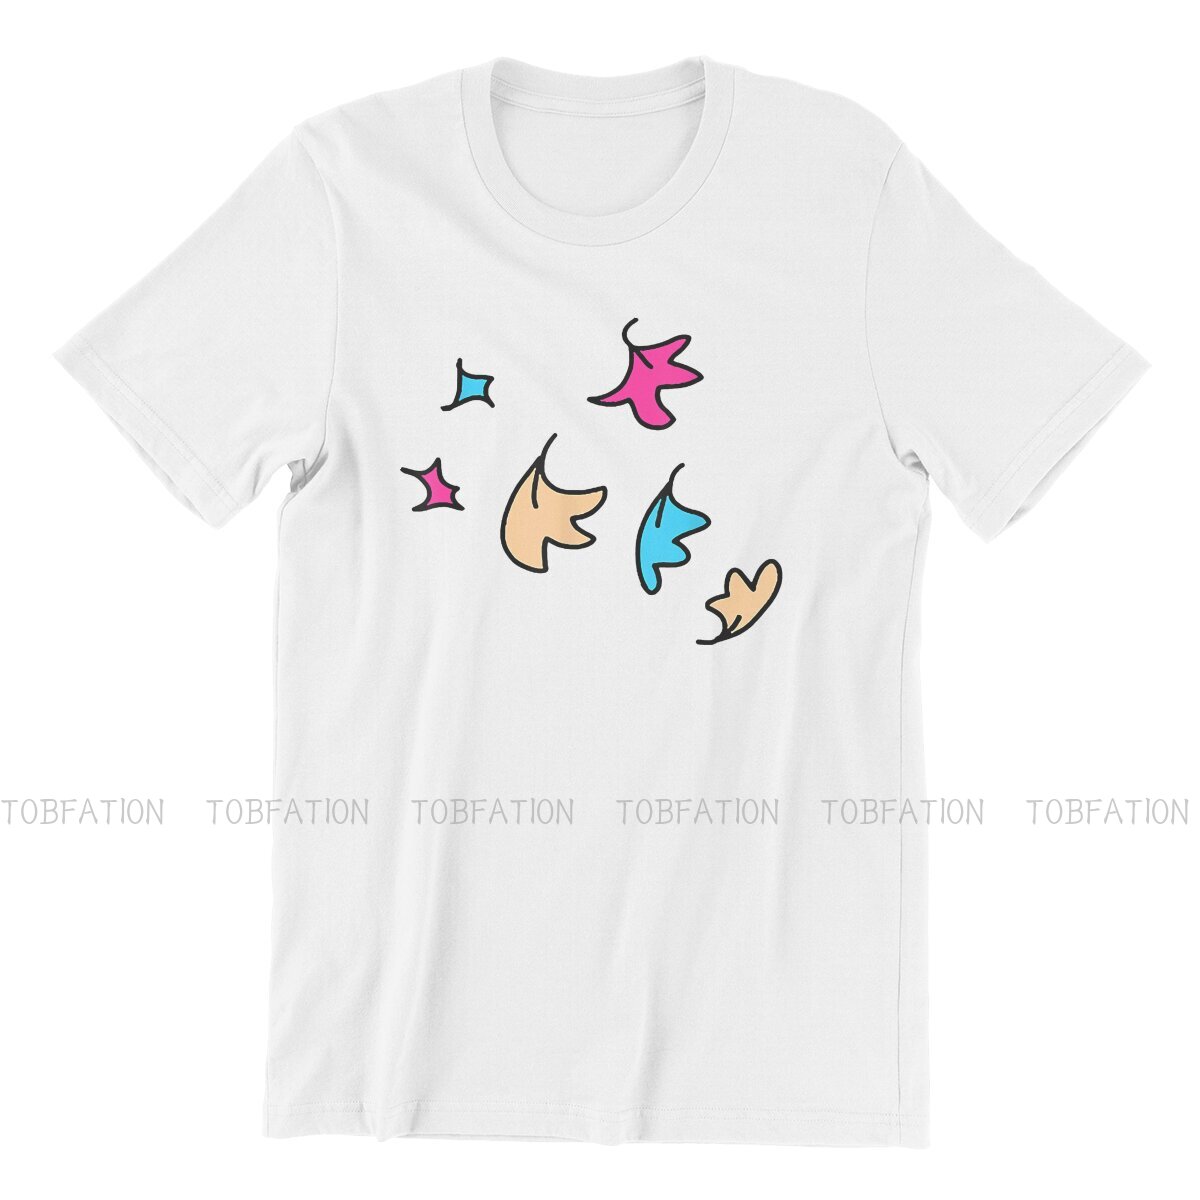 leaves symbol lover hip hop tshirt alice oseman heartstopper comic creative tops leisure t shirt male tee unique gift clothes 4816